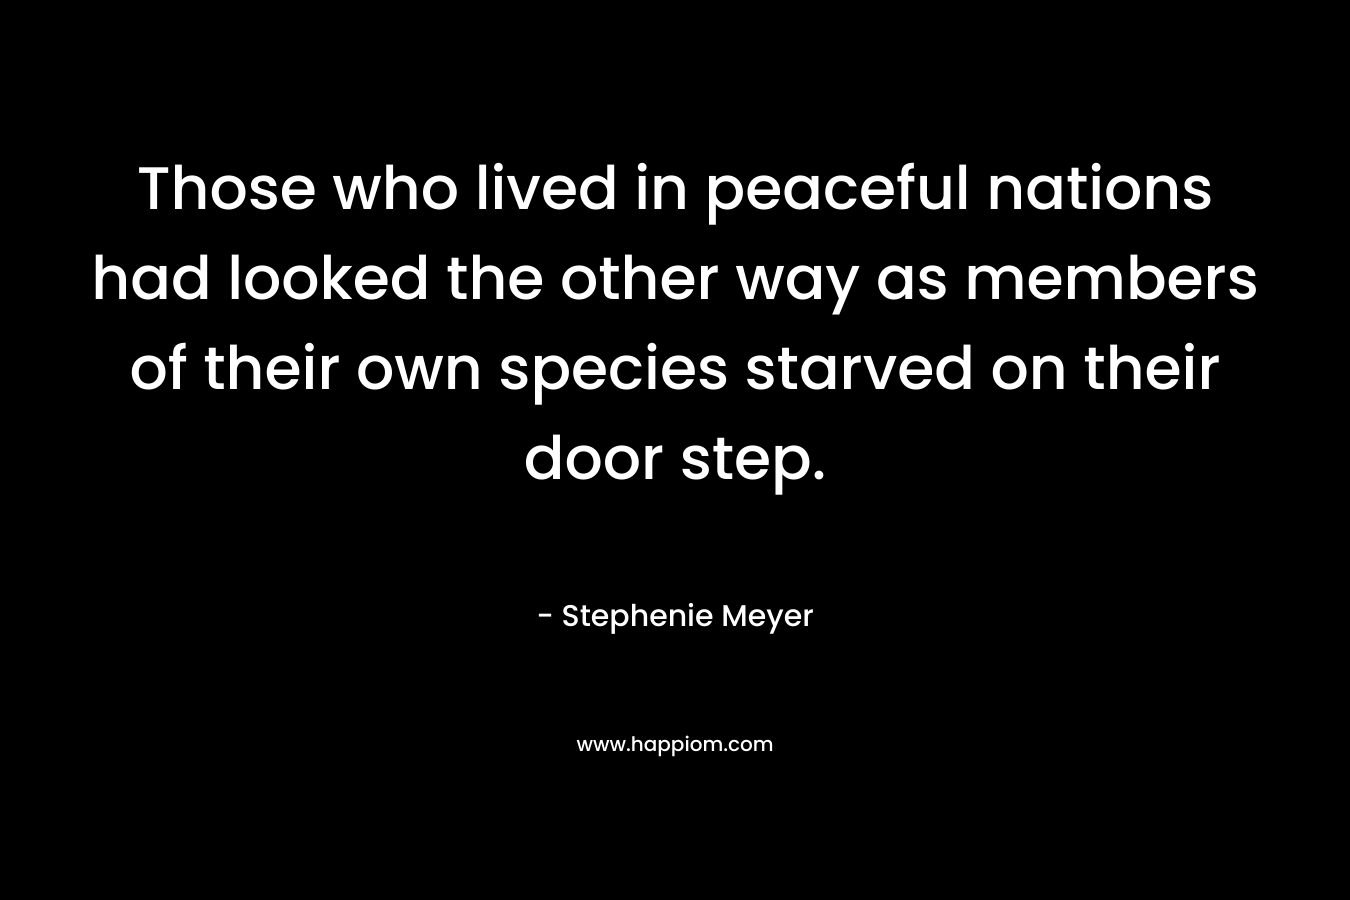 Those who lived in peaceful nations had looked the other way as members of their own species starved on their door step.